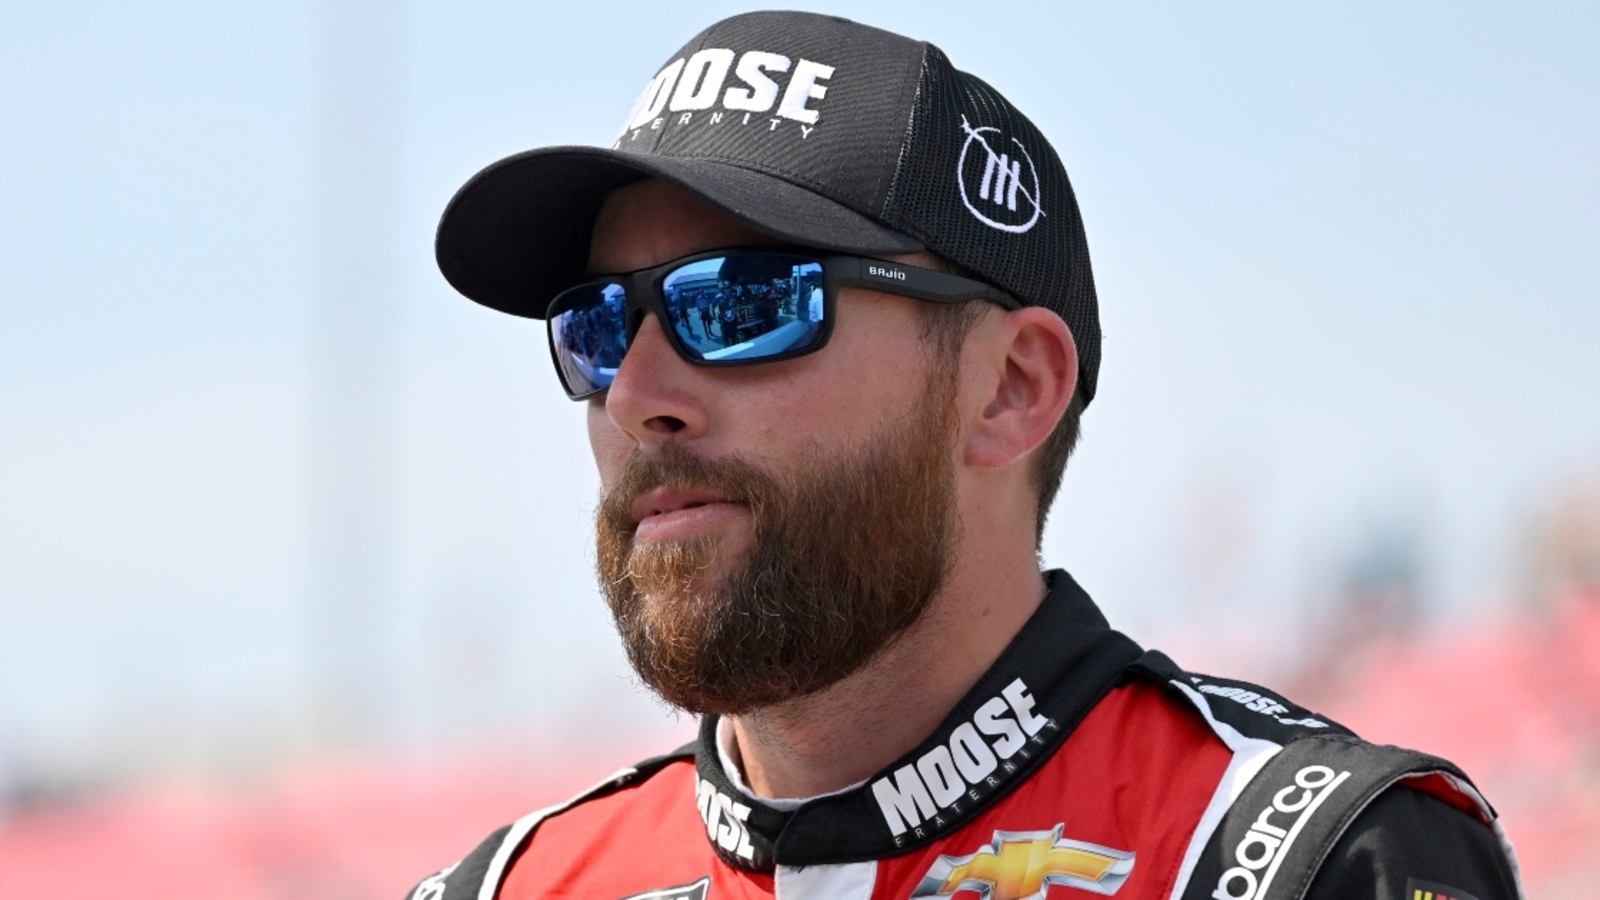 Kyle Petty says Ross Chastain’s retaliation on Tyler Reddick was ‘uncalled for’